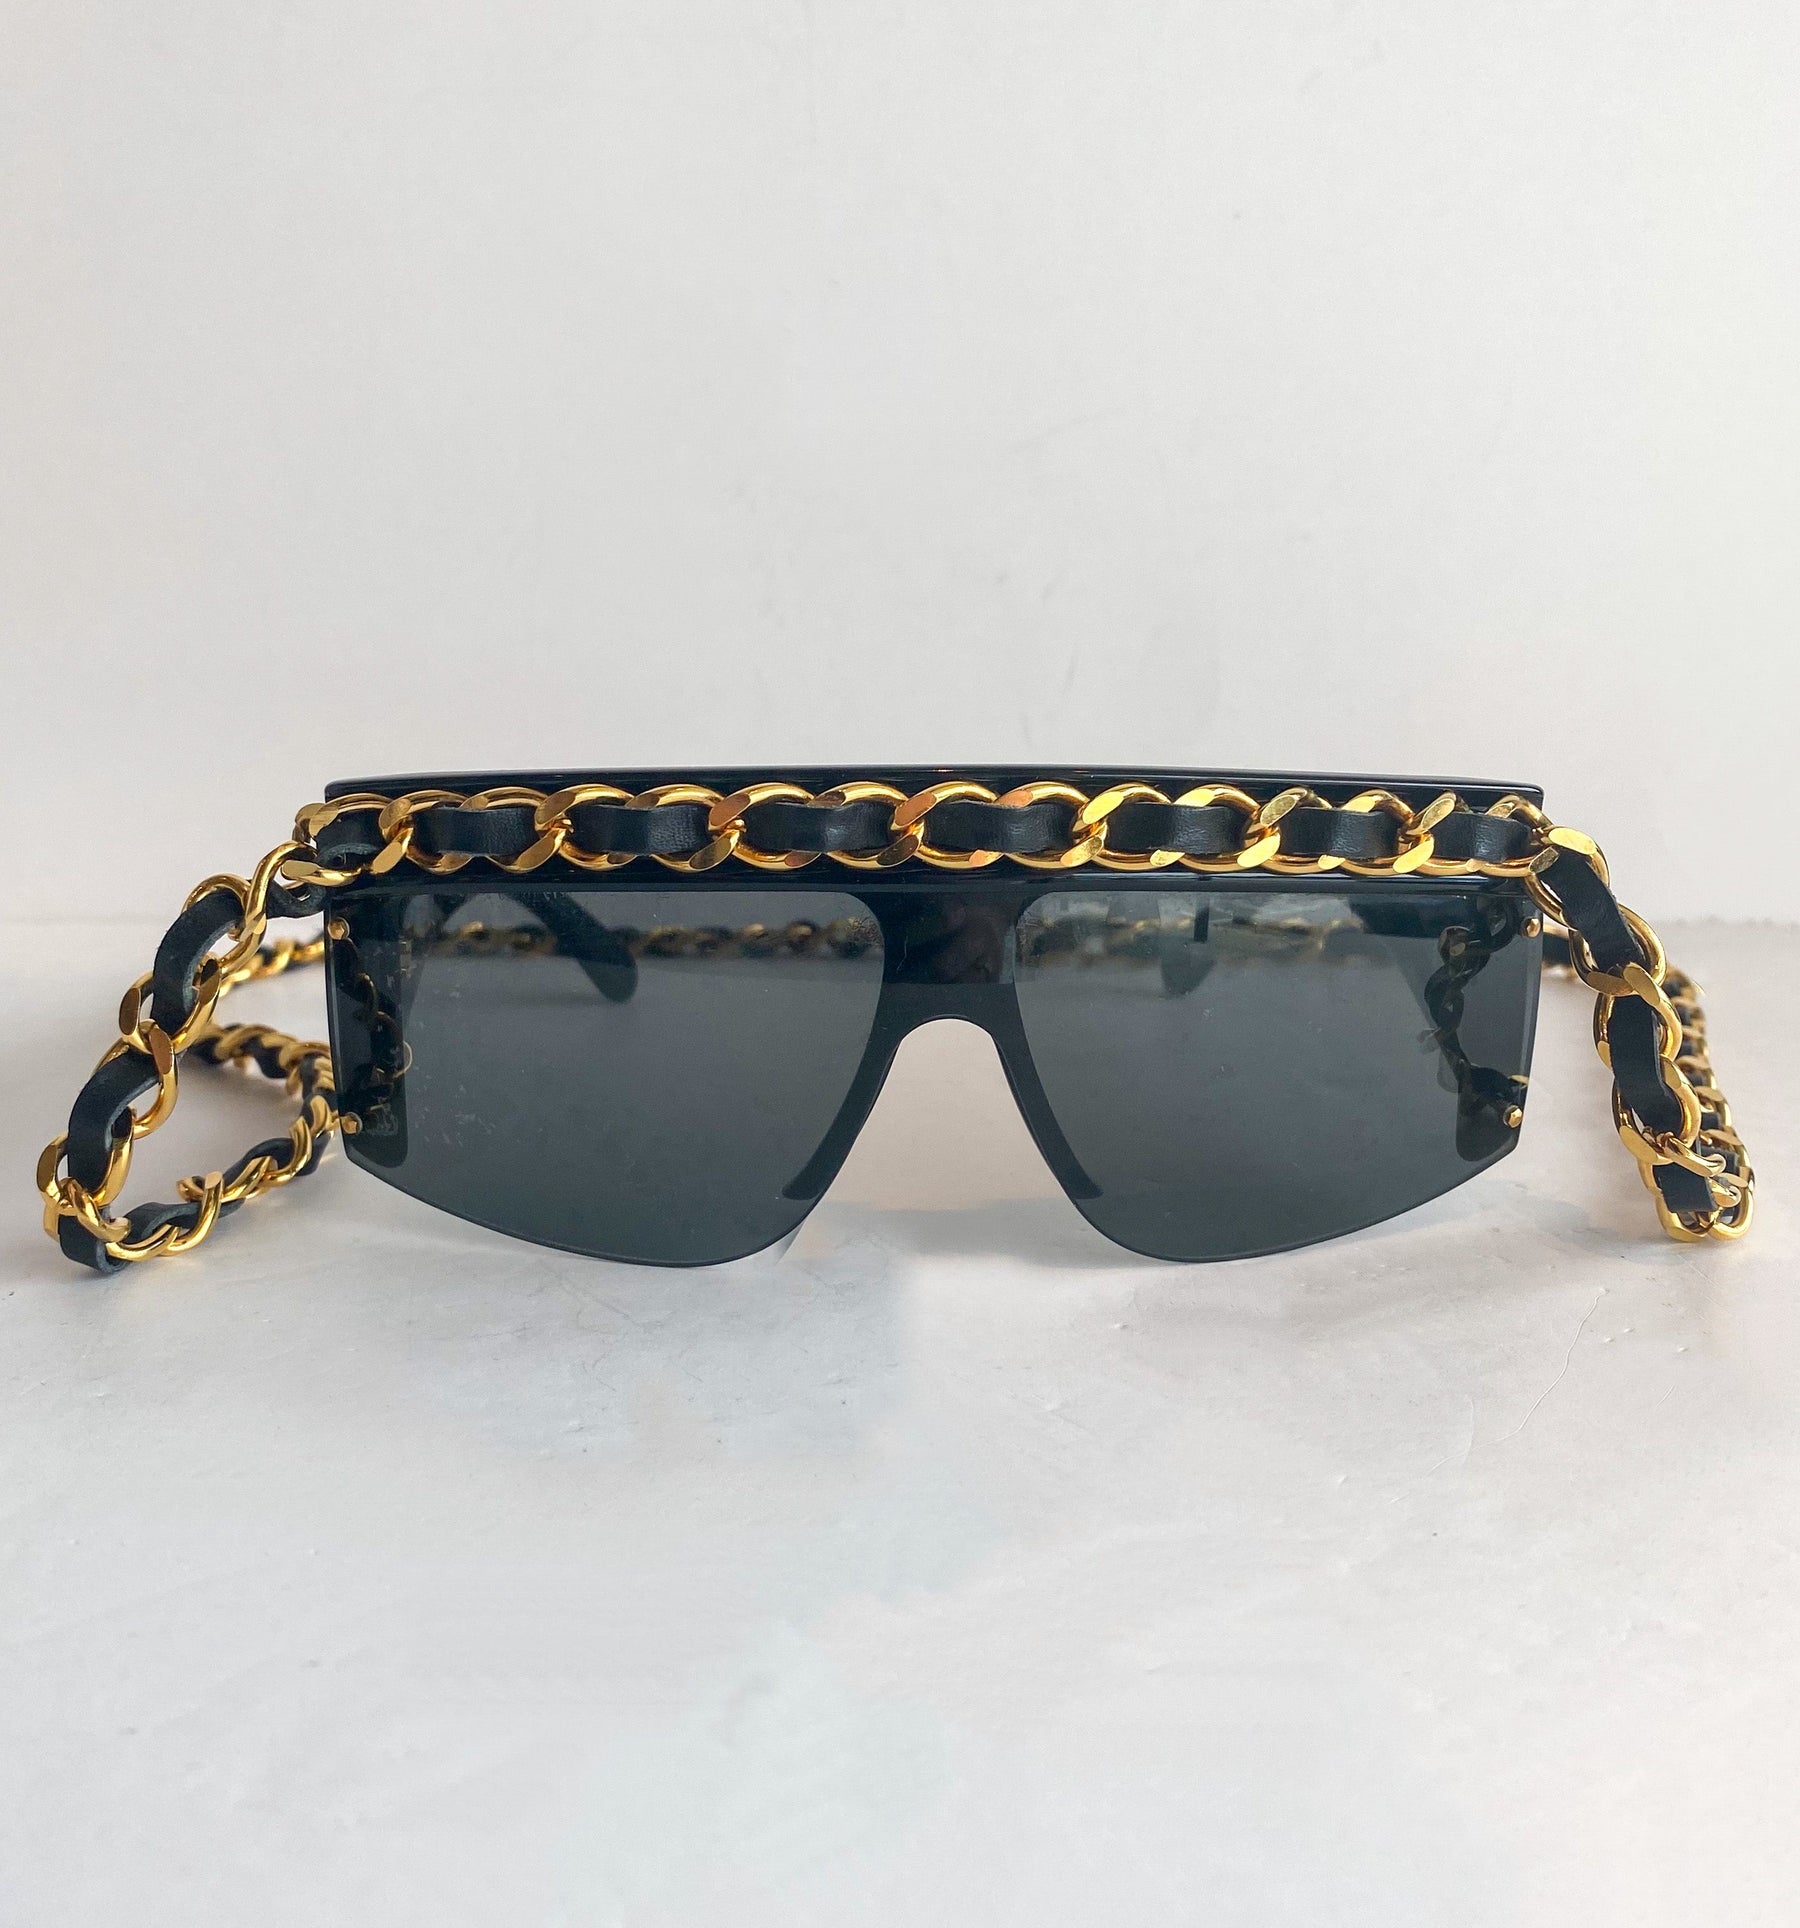 Chanel Chain-link Sunglasses Vintage Front of Sunglasses